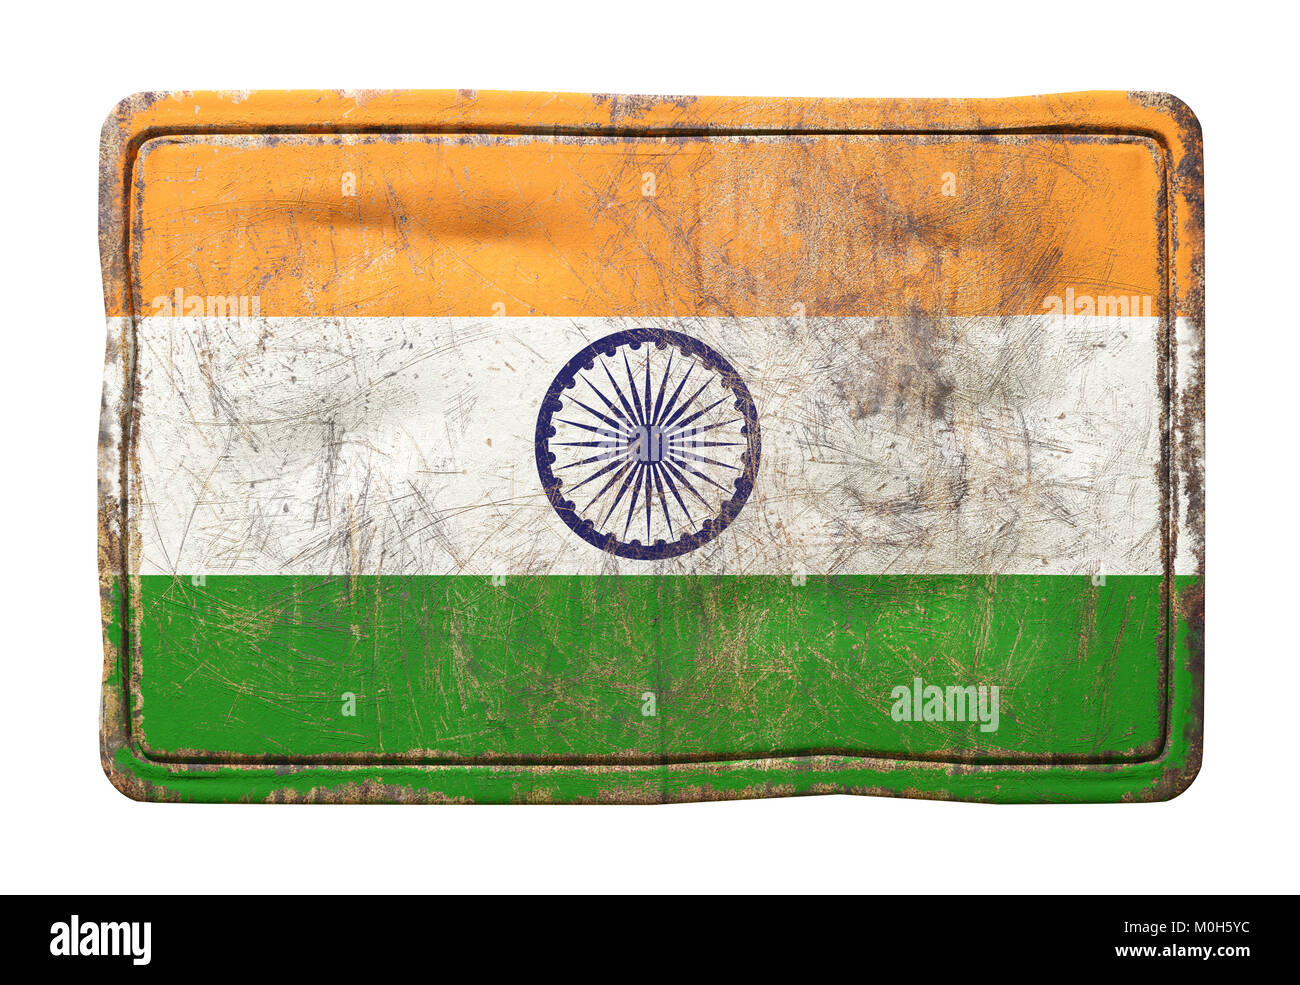 3d rendering of a India flag over a rusty metallic plate. Isolated on white background. Stock Photo